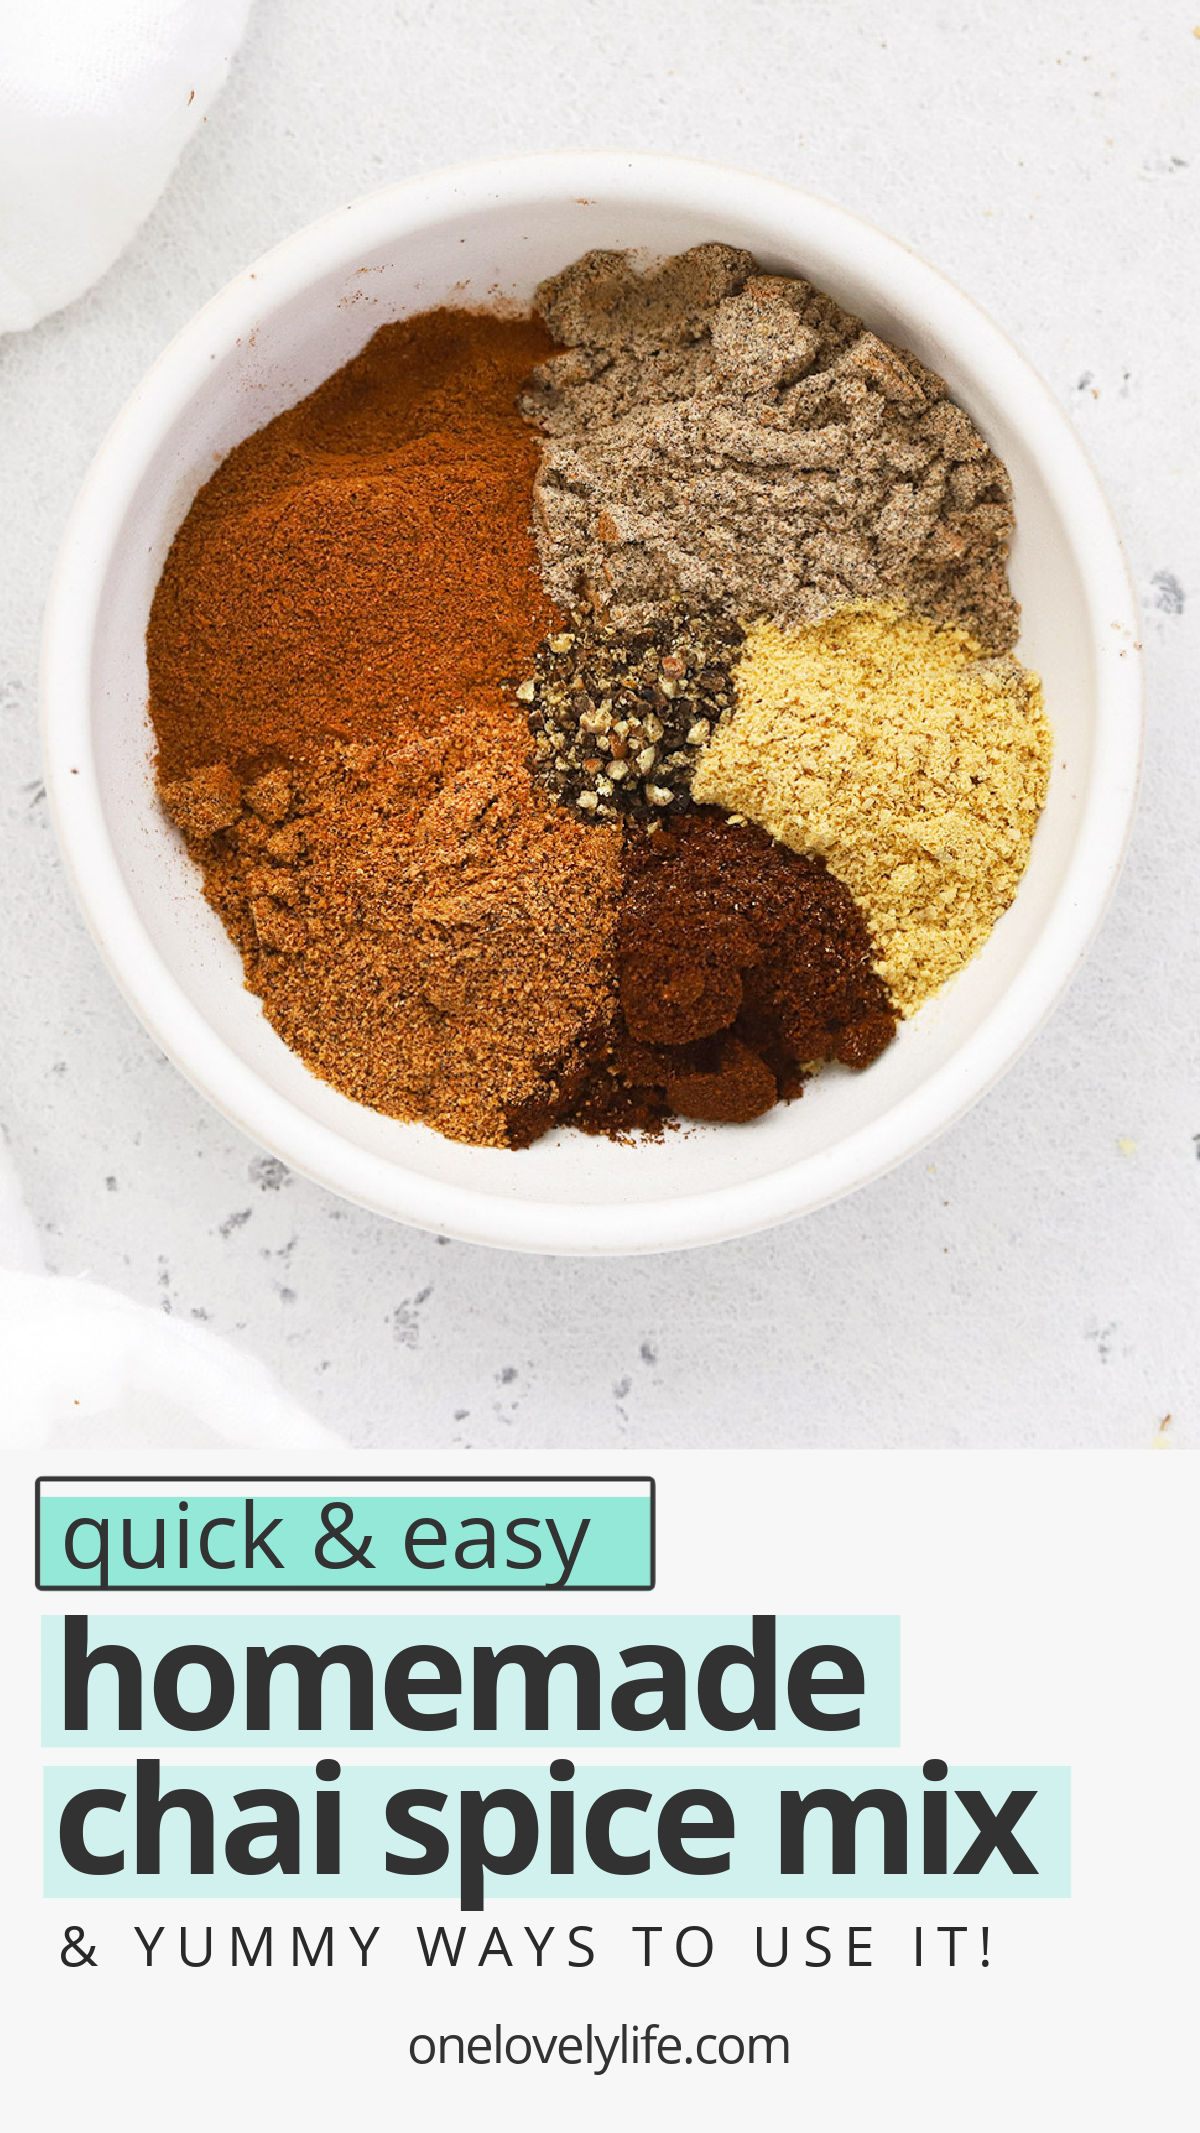 Chai Spice Mix - Learn how to make chai spice mix with our easy recipe! Add it to drinks, baked goods, and so much more. Don't miss all our favorite ways to use it in the post! (Naturally vegan, paleo, Whole30) // DIY Chai Spice // Homemade Chai Mix // Homemade Spice Blend // Chai Spice From Scratch//